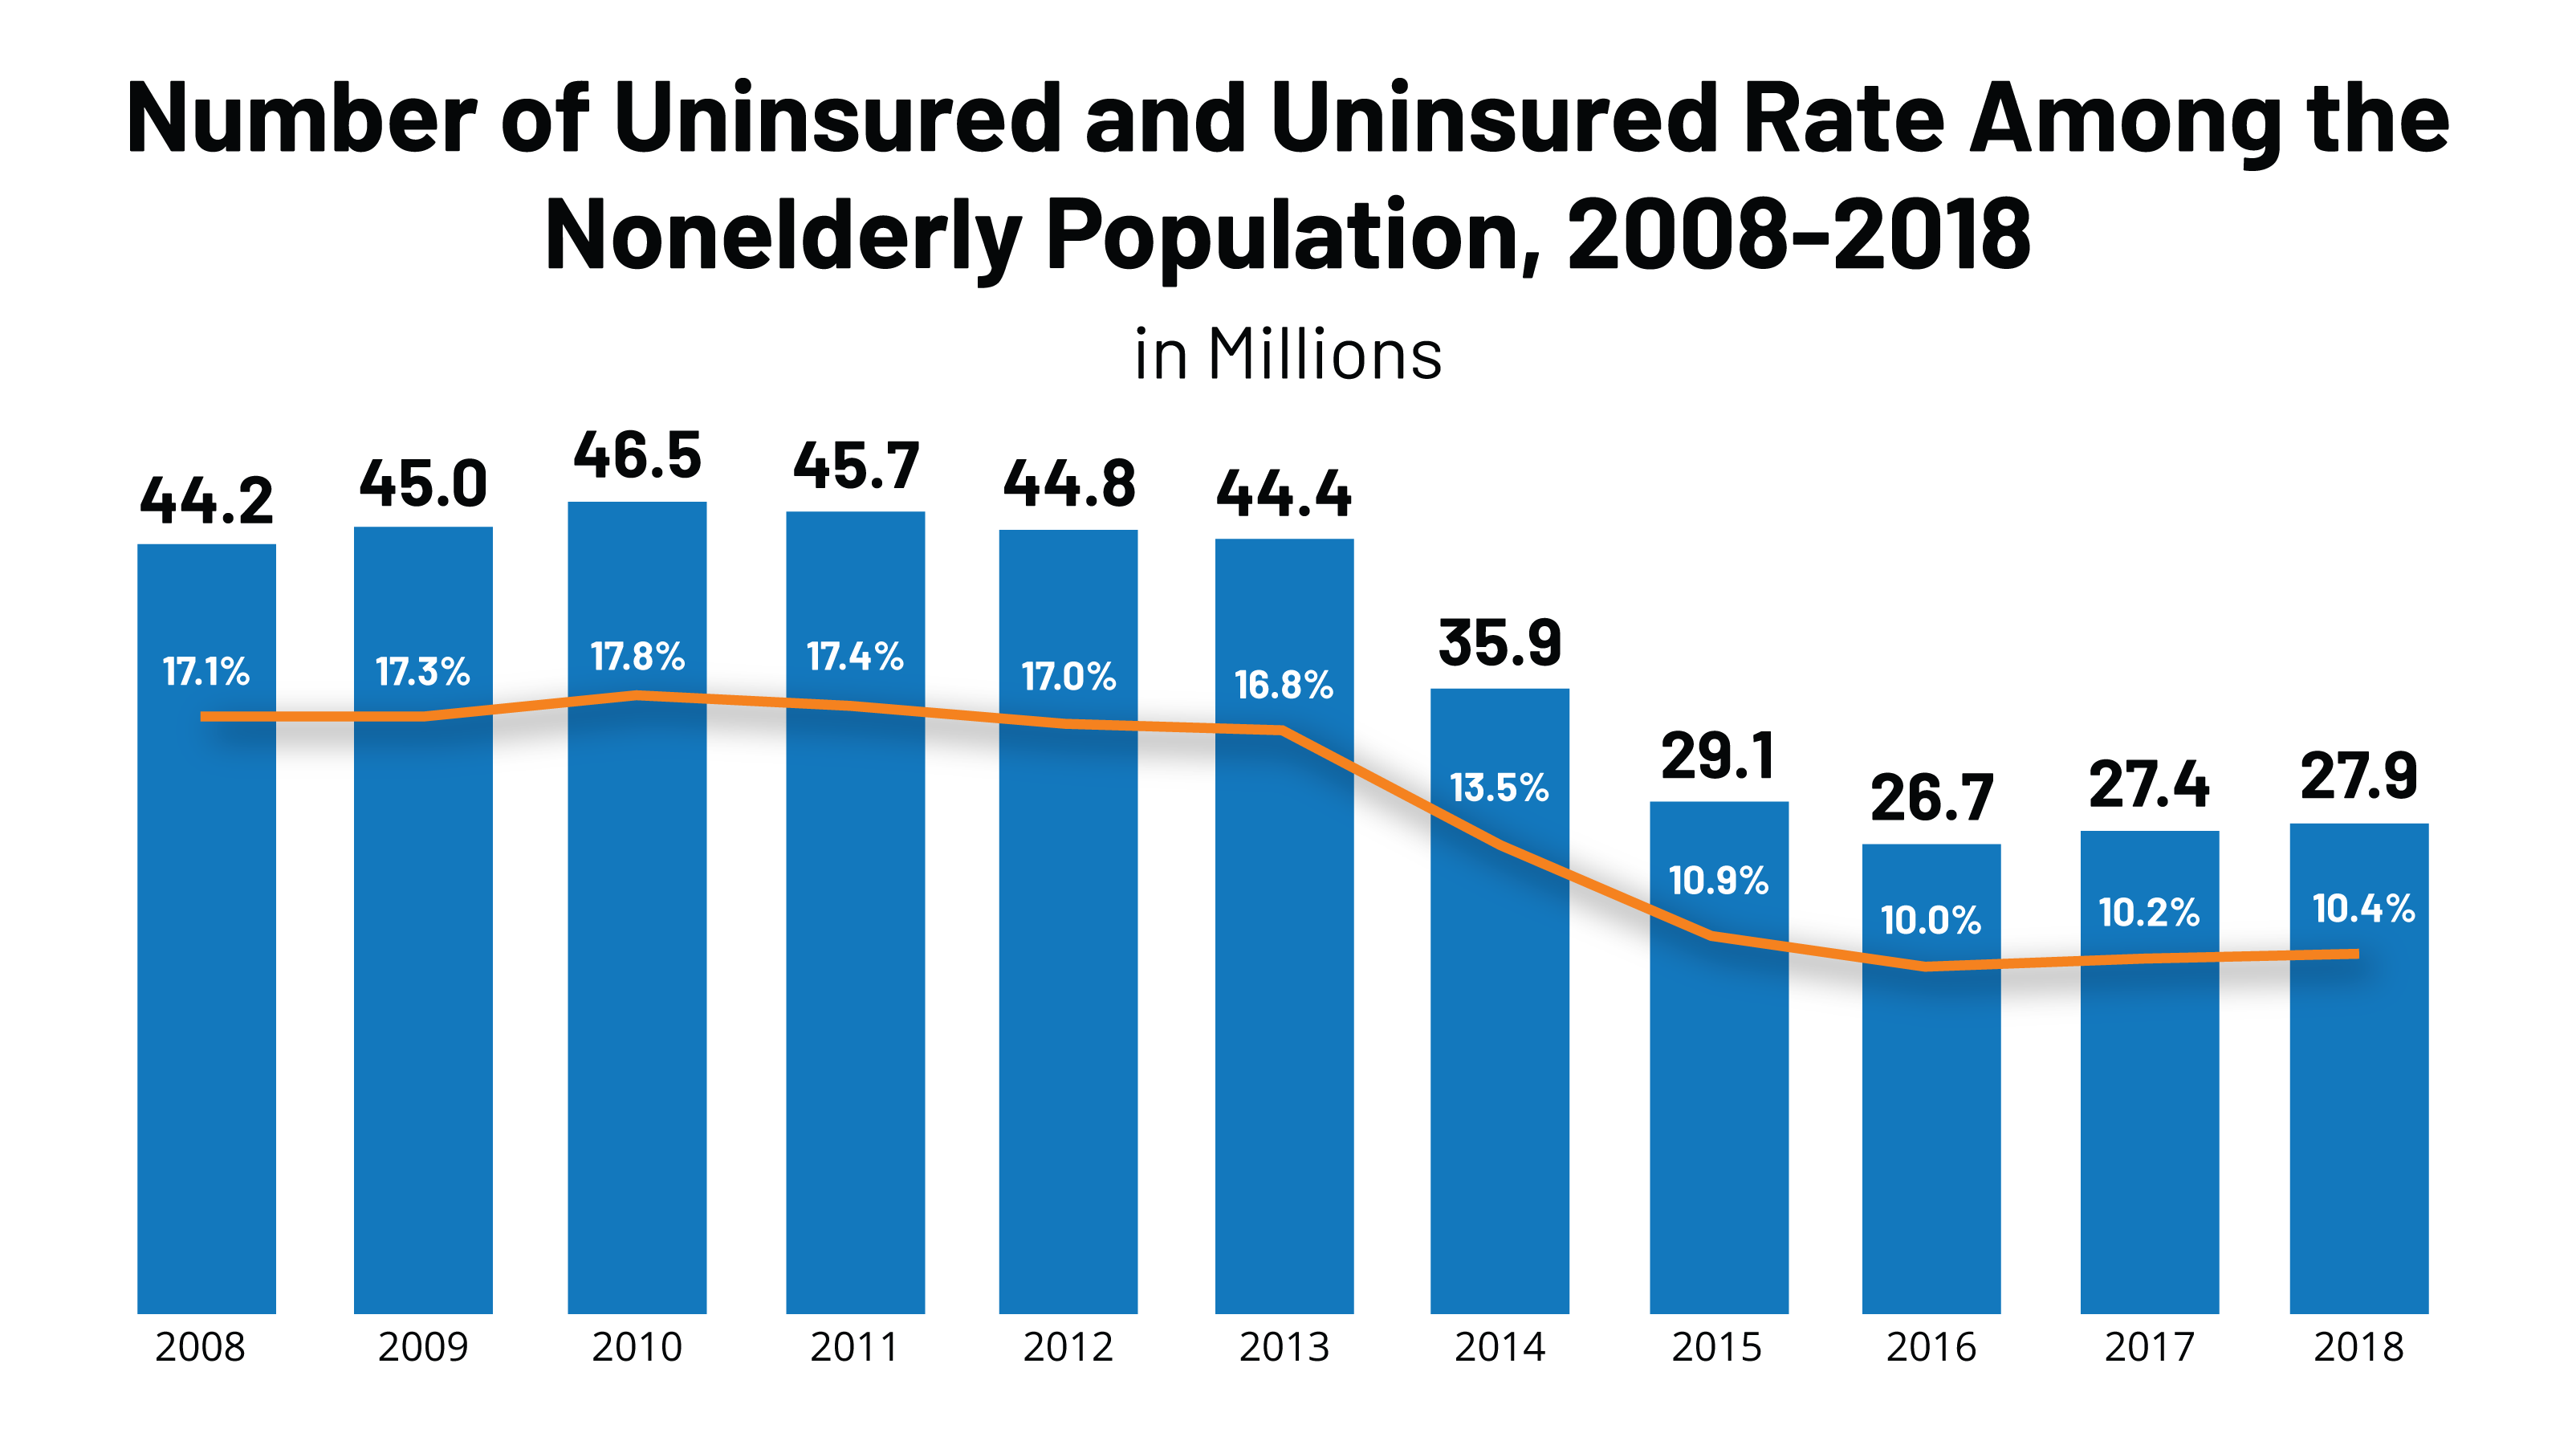 FEATURE-IMAGE-Number-of-Uninsured-and-Uninsured-Rate-among-the-Nonelderly-Population-2008-2018_1.png